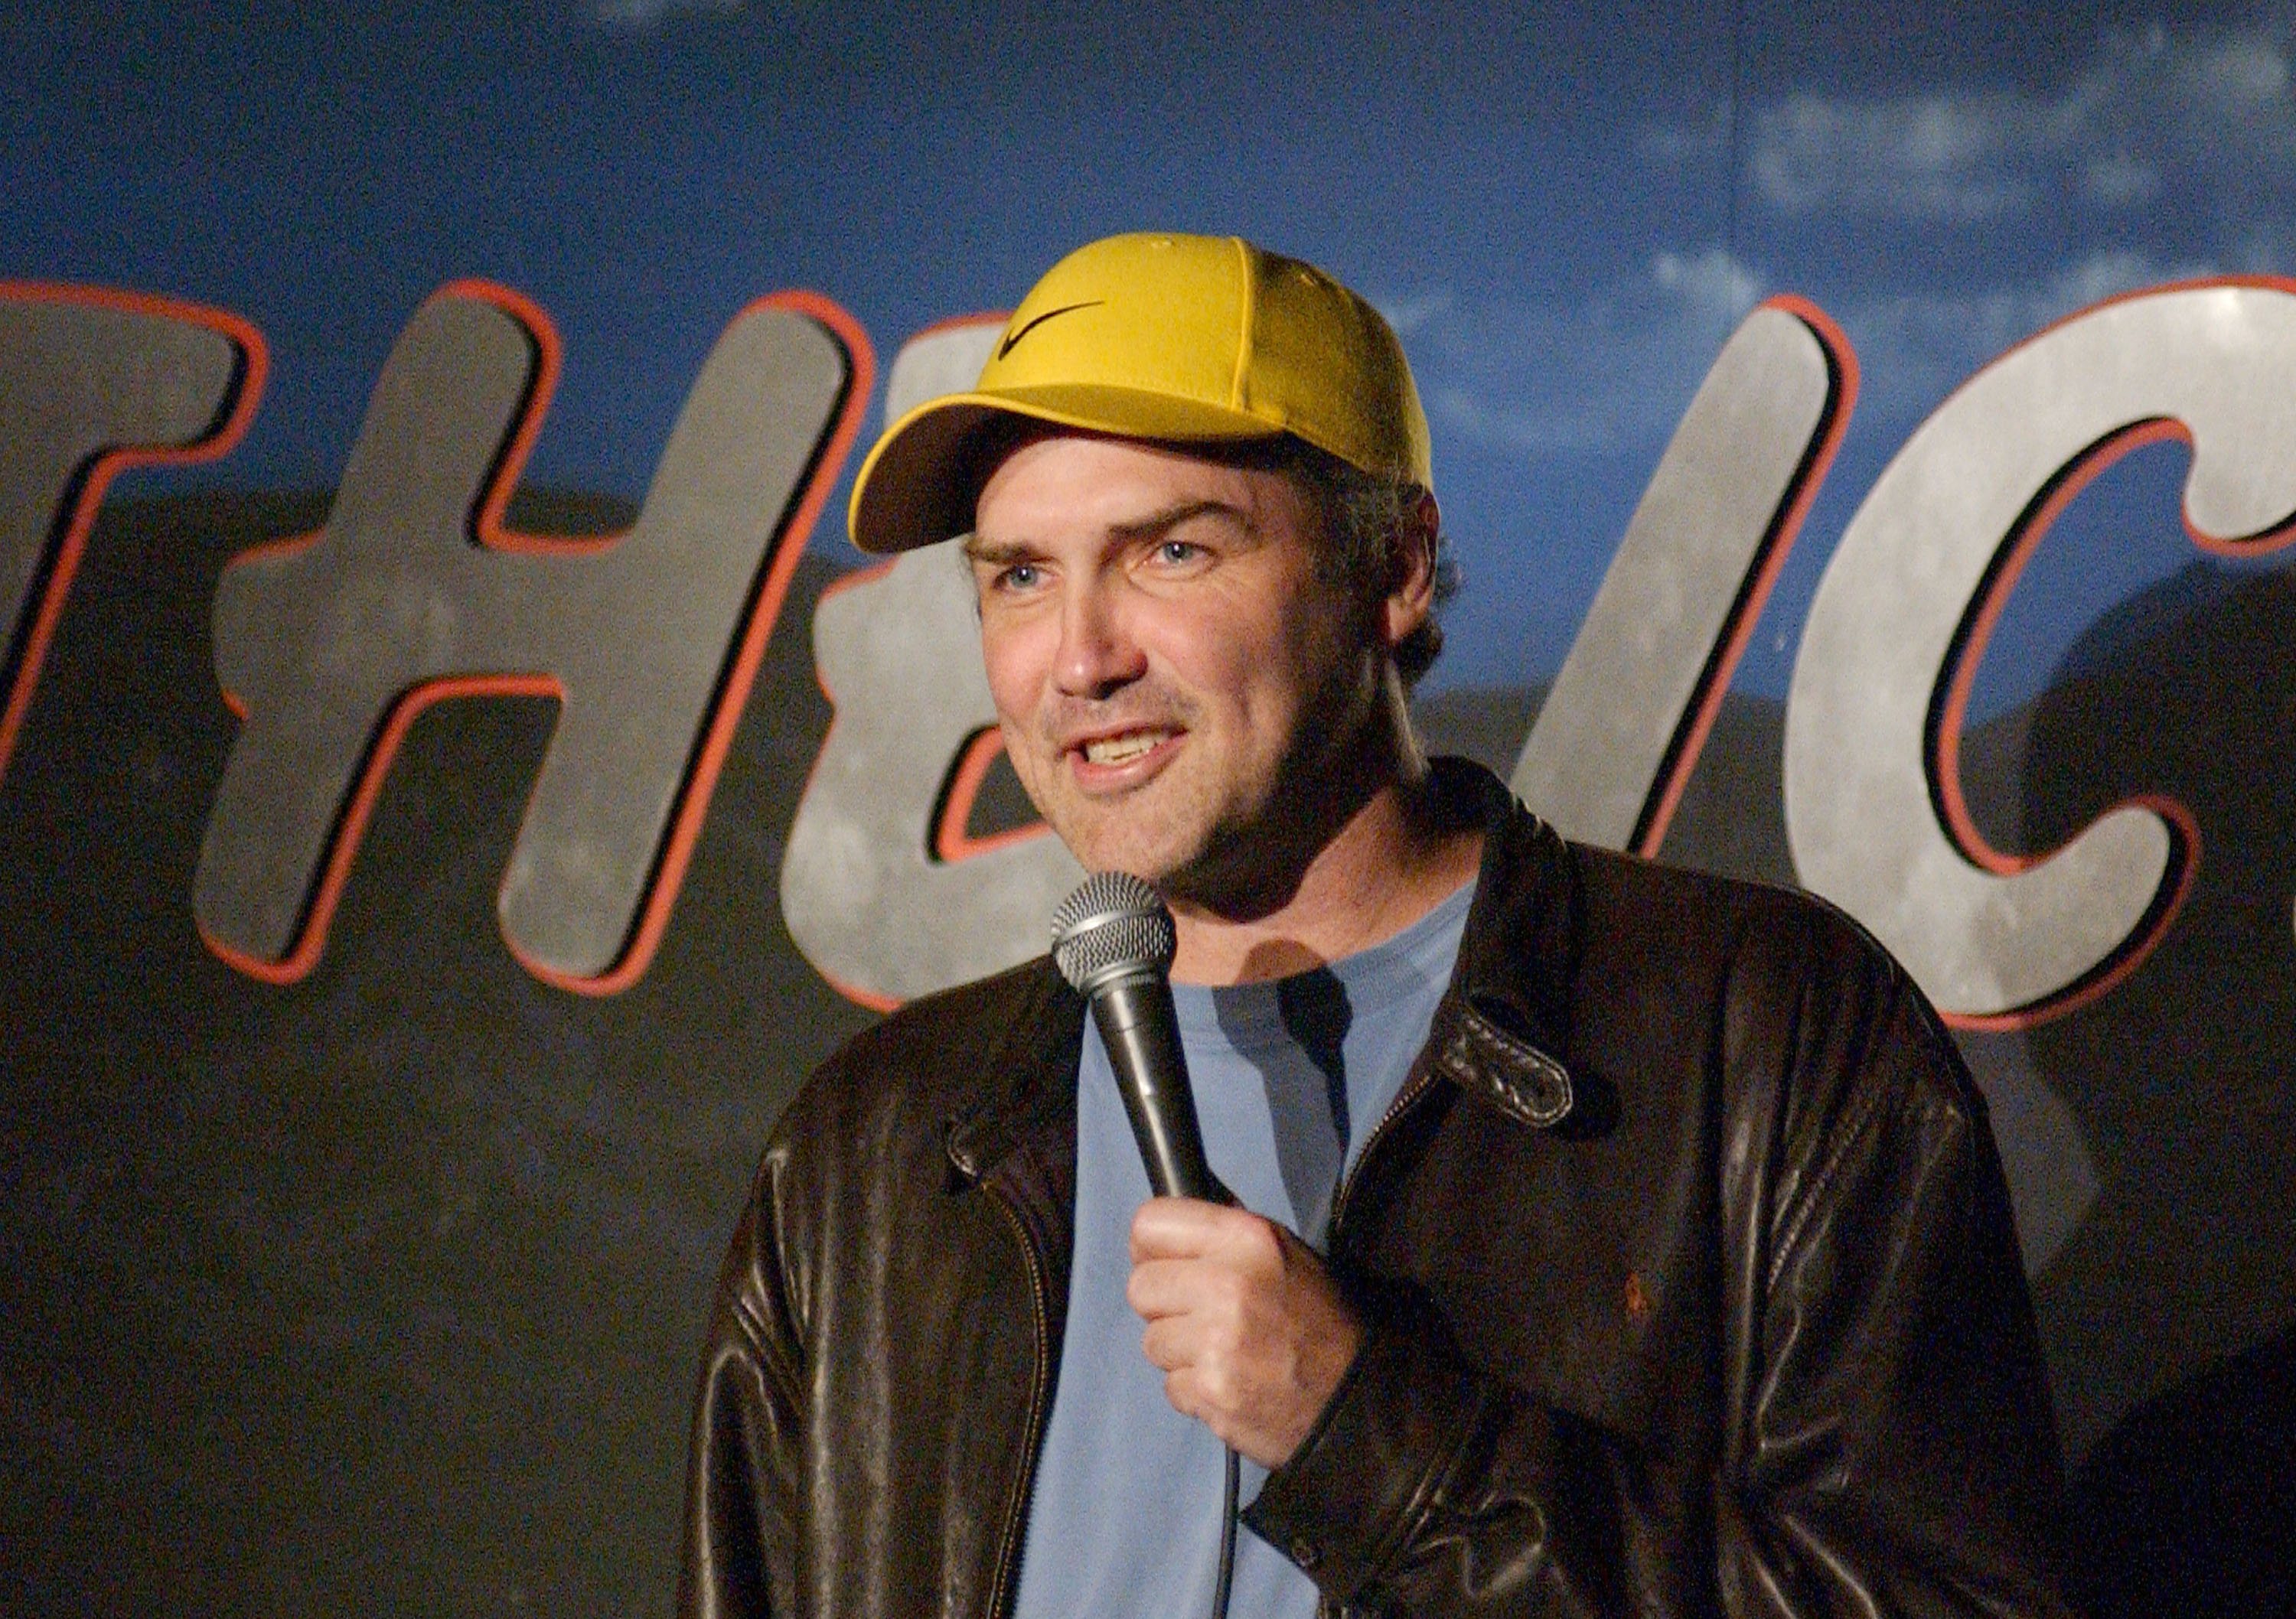 Comedian Norm MacDonald Performs at The Ice House